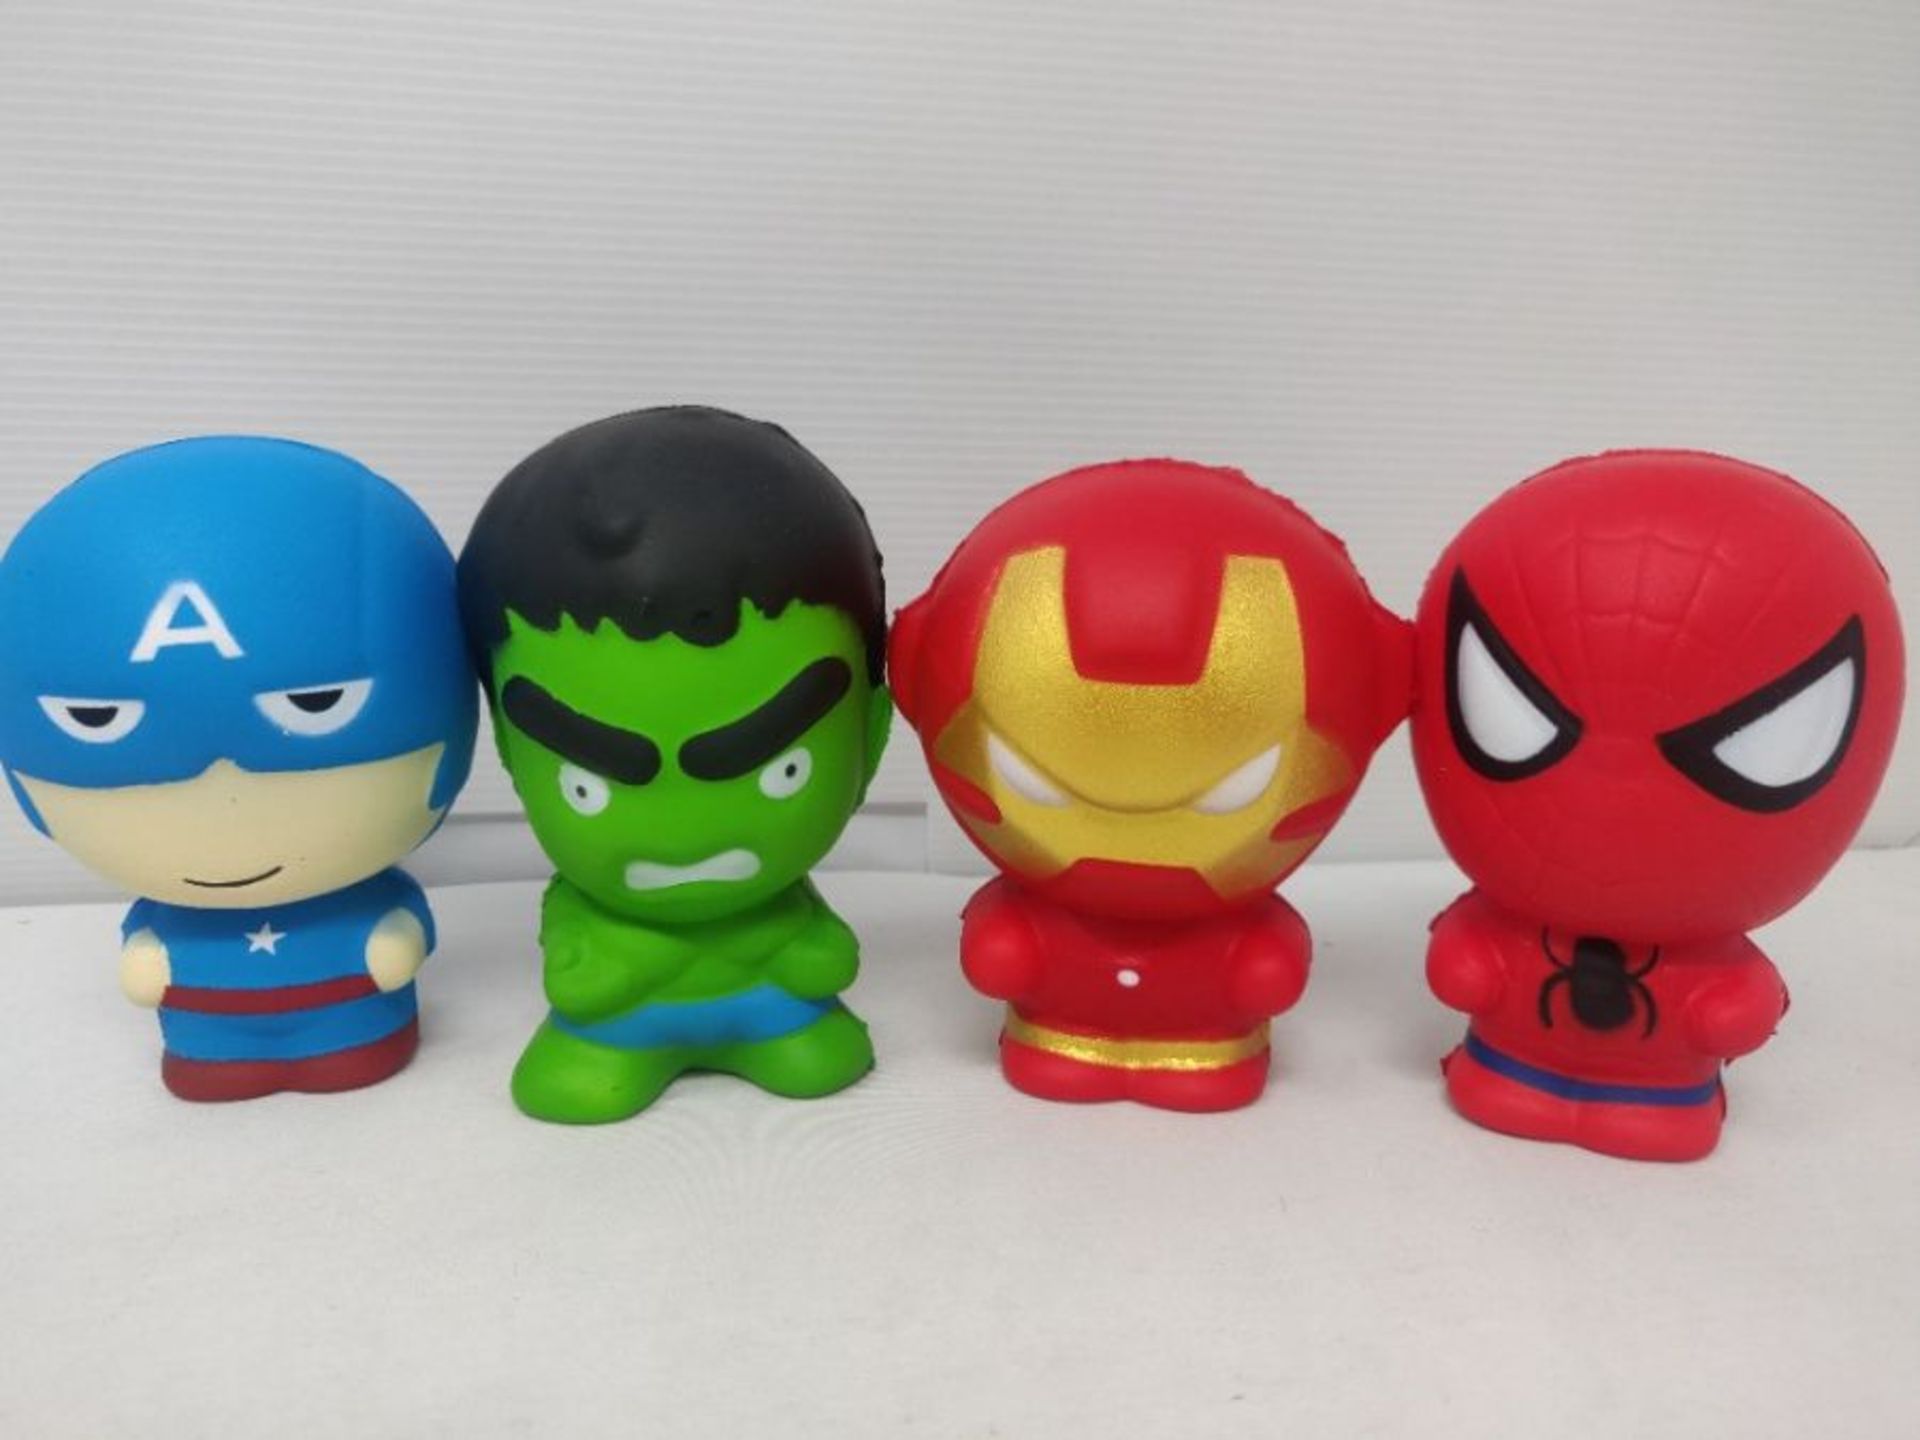 BKT Perform Marvel Superhero Toy Squishies Gift Film Characters Squishy 4 Pack Large S - Image 3 of 3